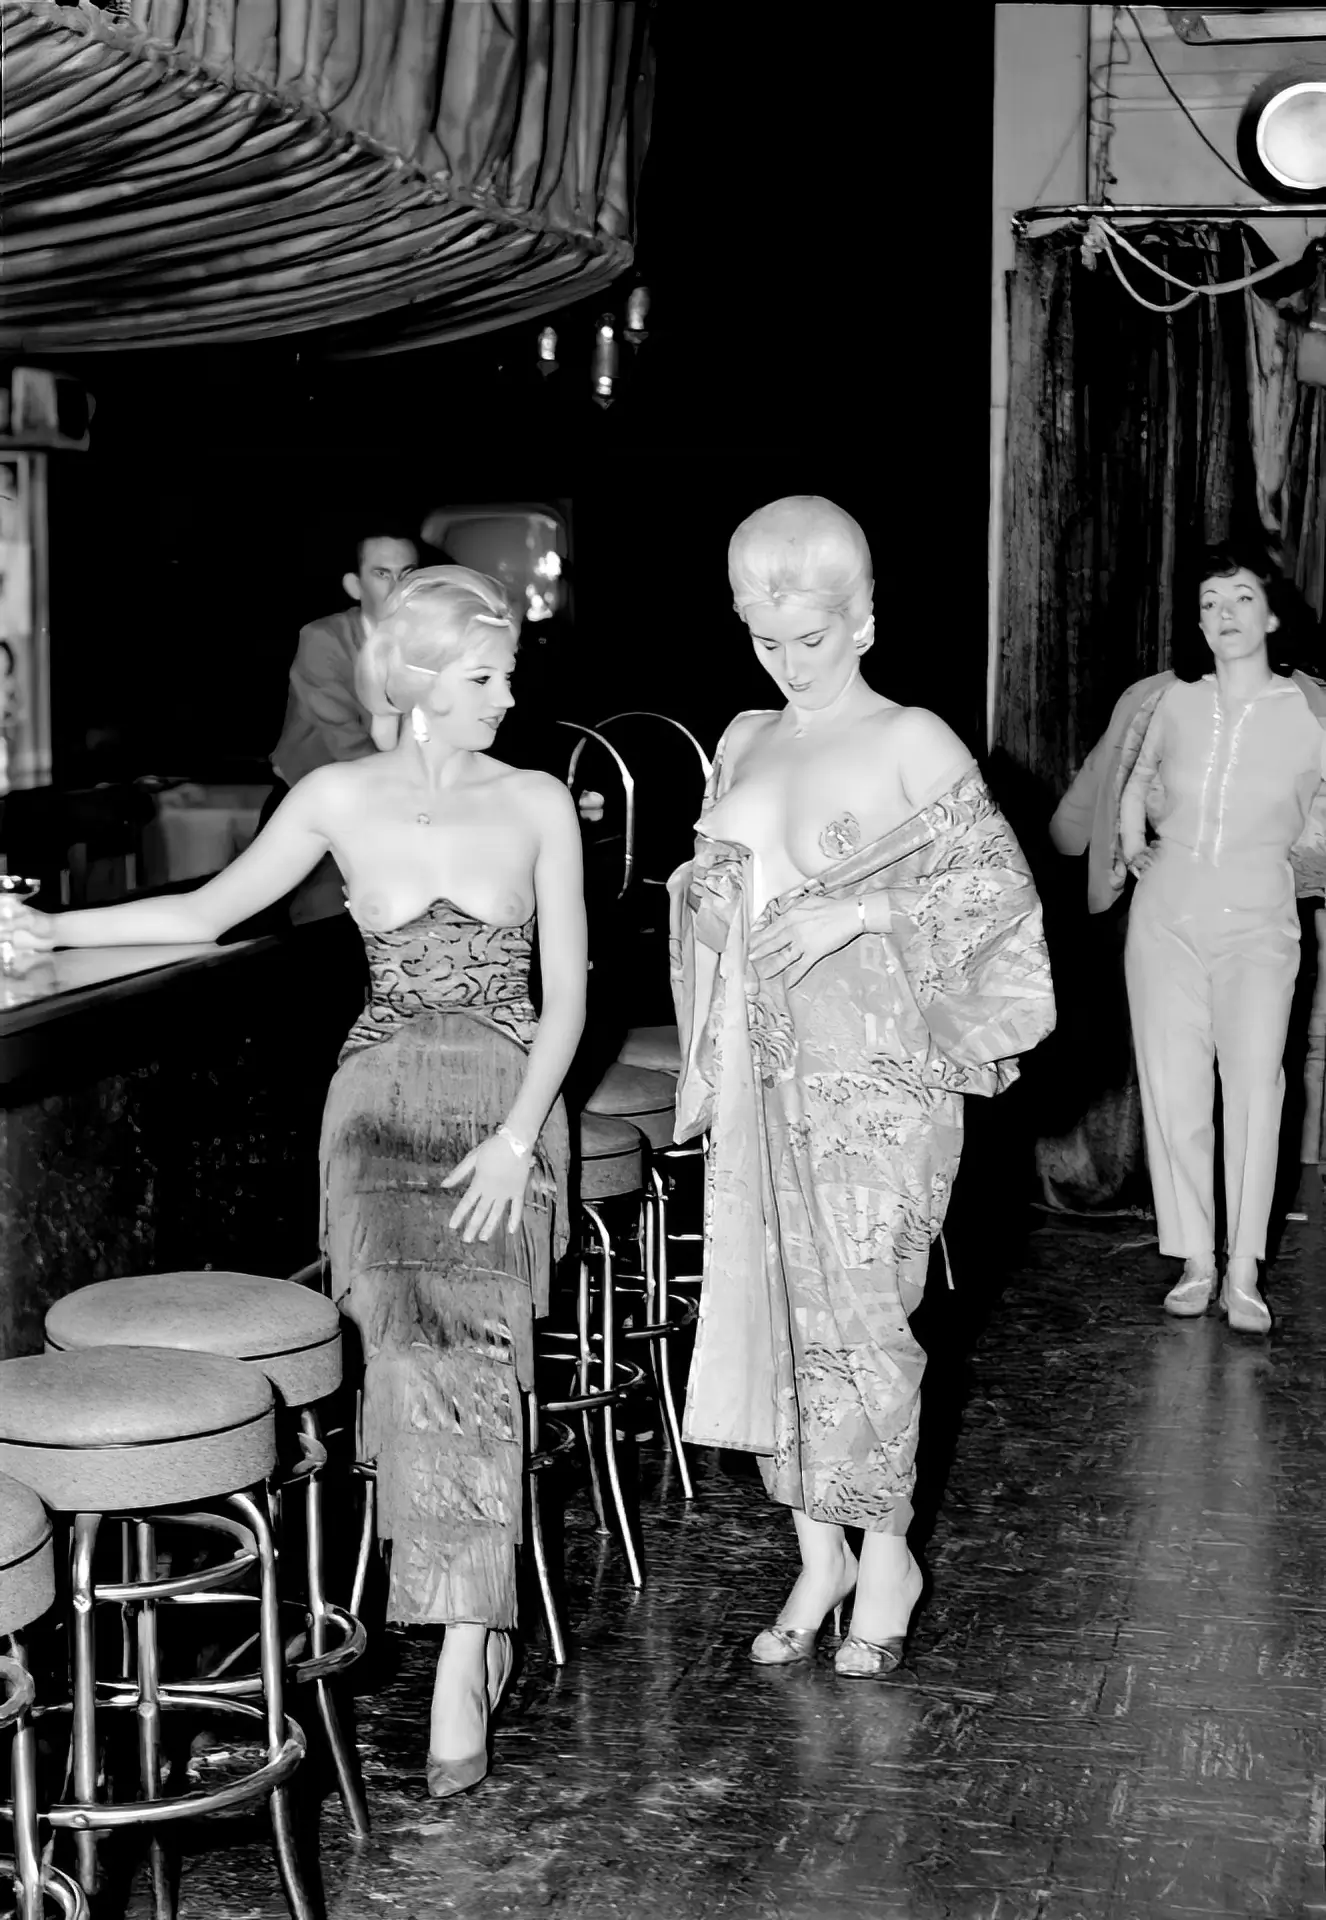 Topless burlesque ladies wear long dresses in a theatre